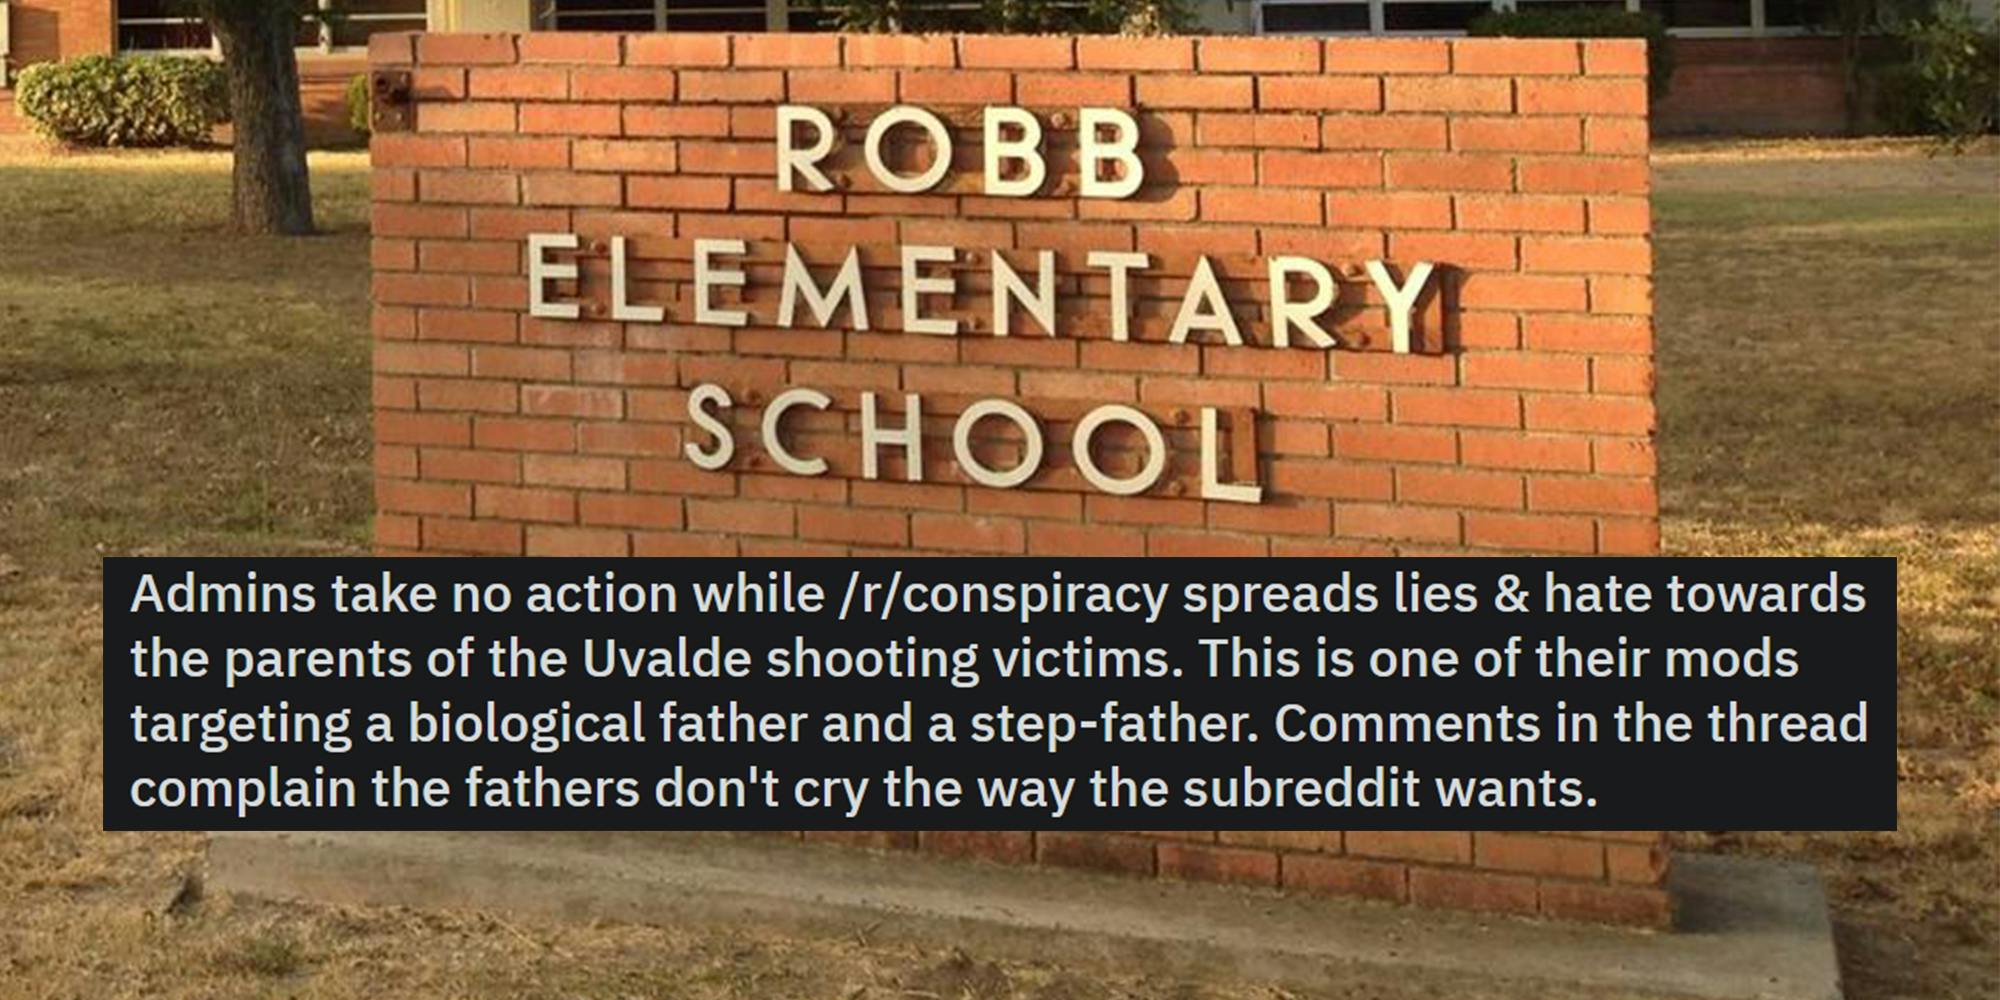 Ulvade Texas Robb Elementary School sign outside with Reddit post by justalazygamer centered caption "Admins take no action while /r/conspiracy spreads lies & hate towards the parents of the Ulvade shooting victims. This is one of their mods targeting a biological father and a step-father. Comments in the thread complain the fathers don't cry the way the subreddit wants."